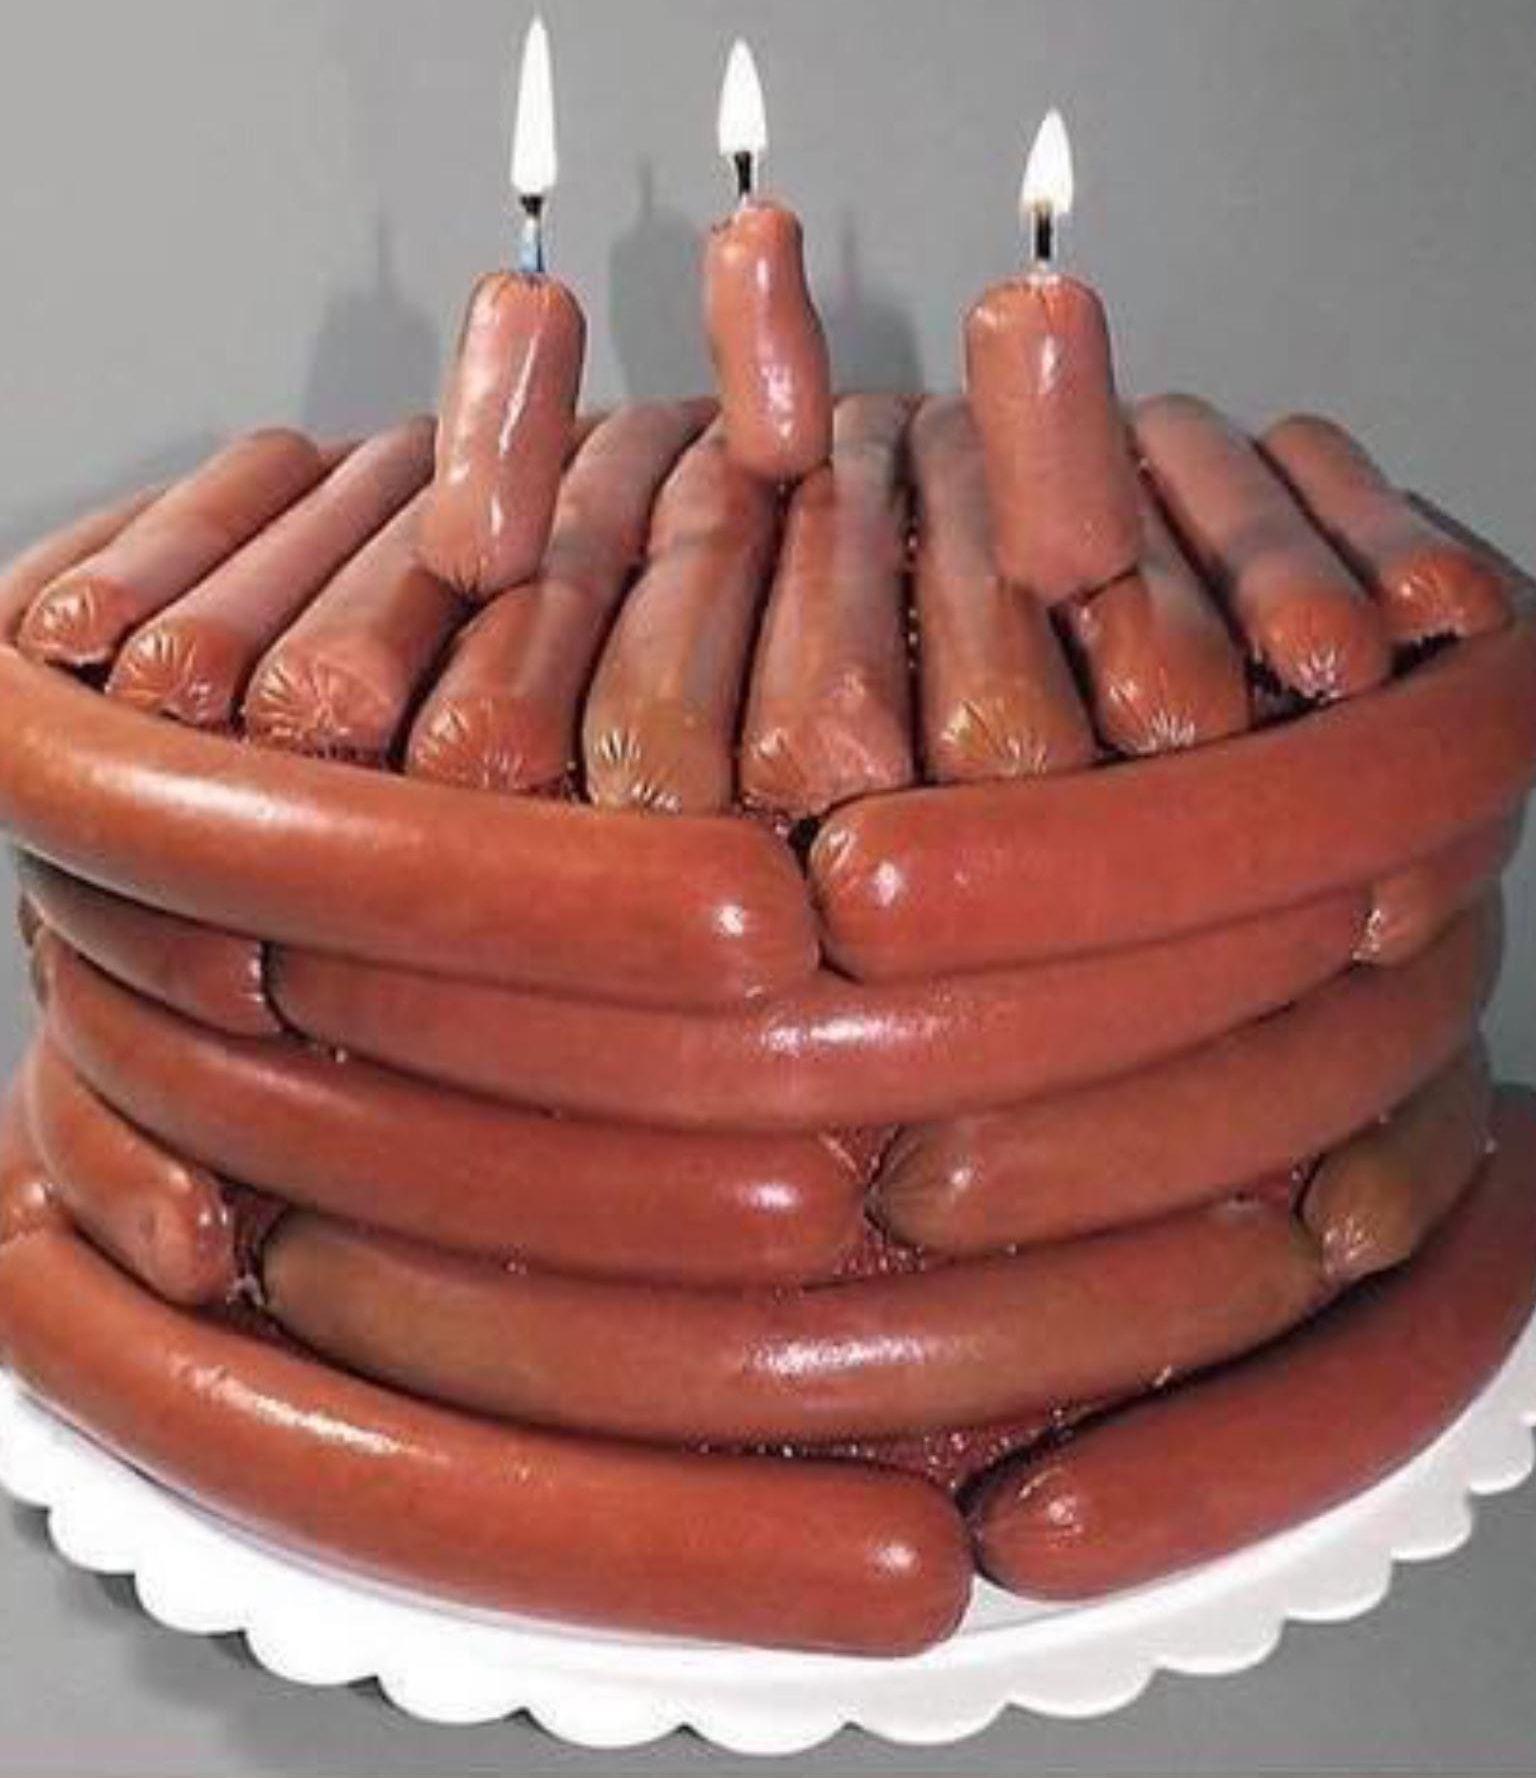 cursed images of cake